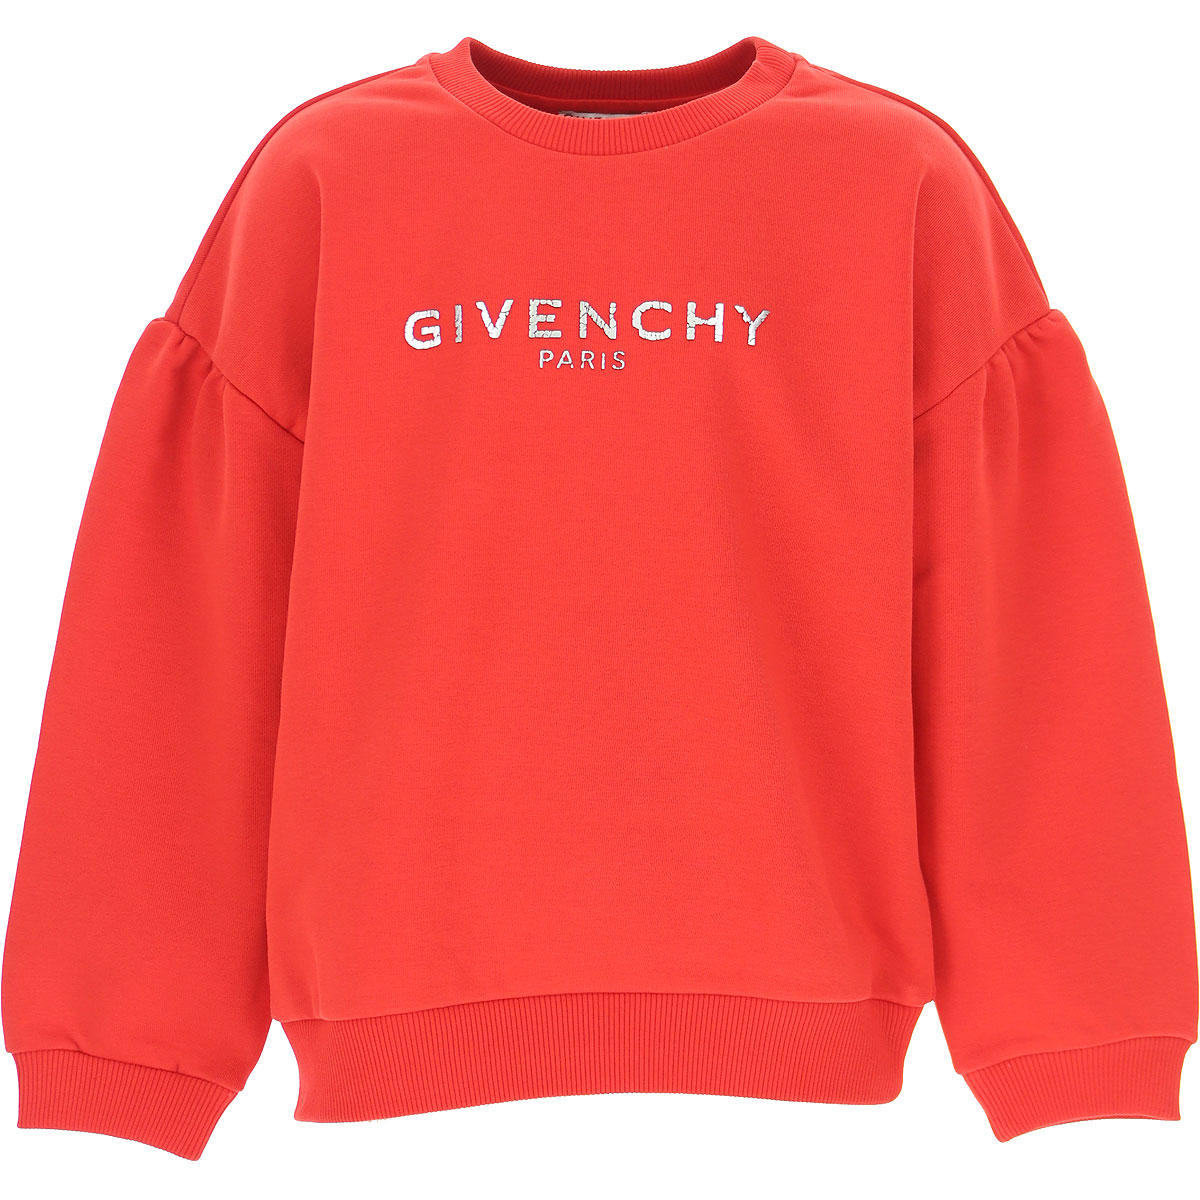 Girls Clothing Givenchy, Style code: h15175-991-